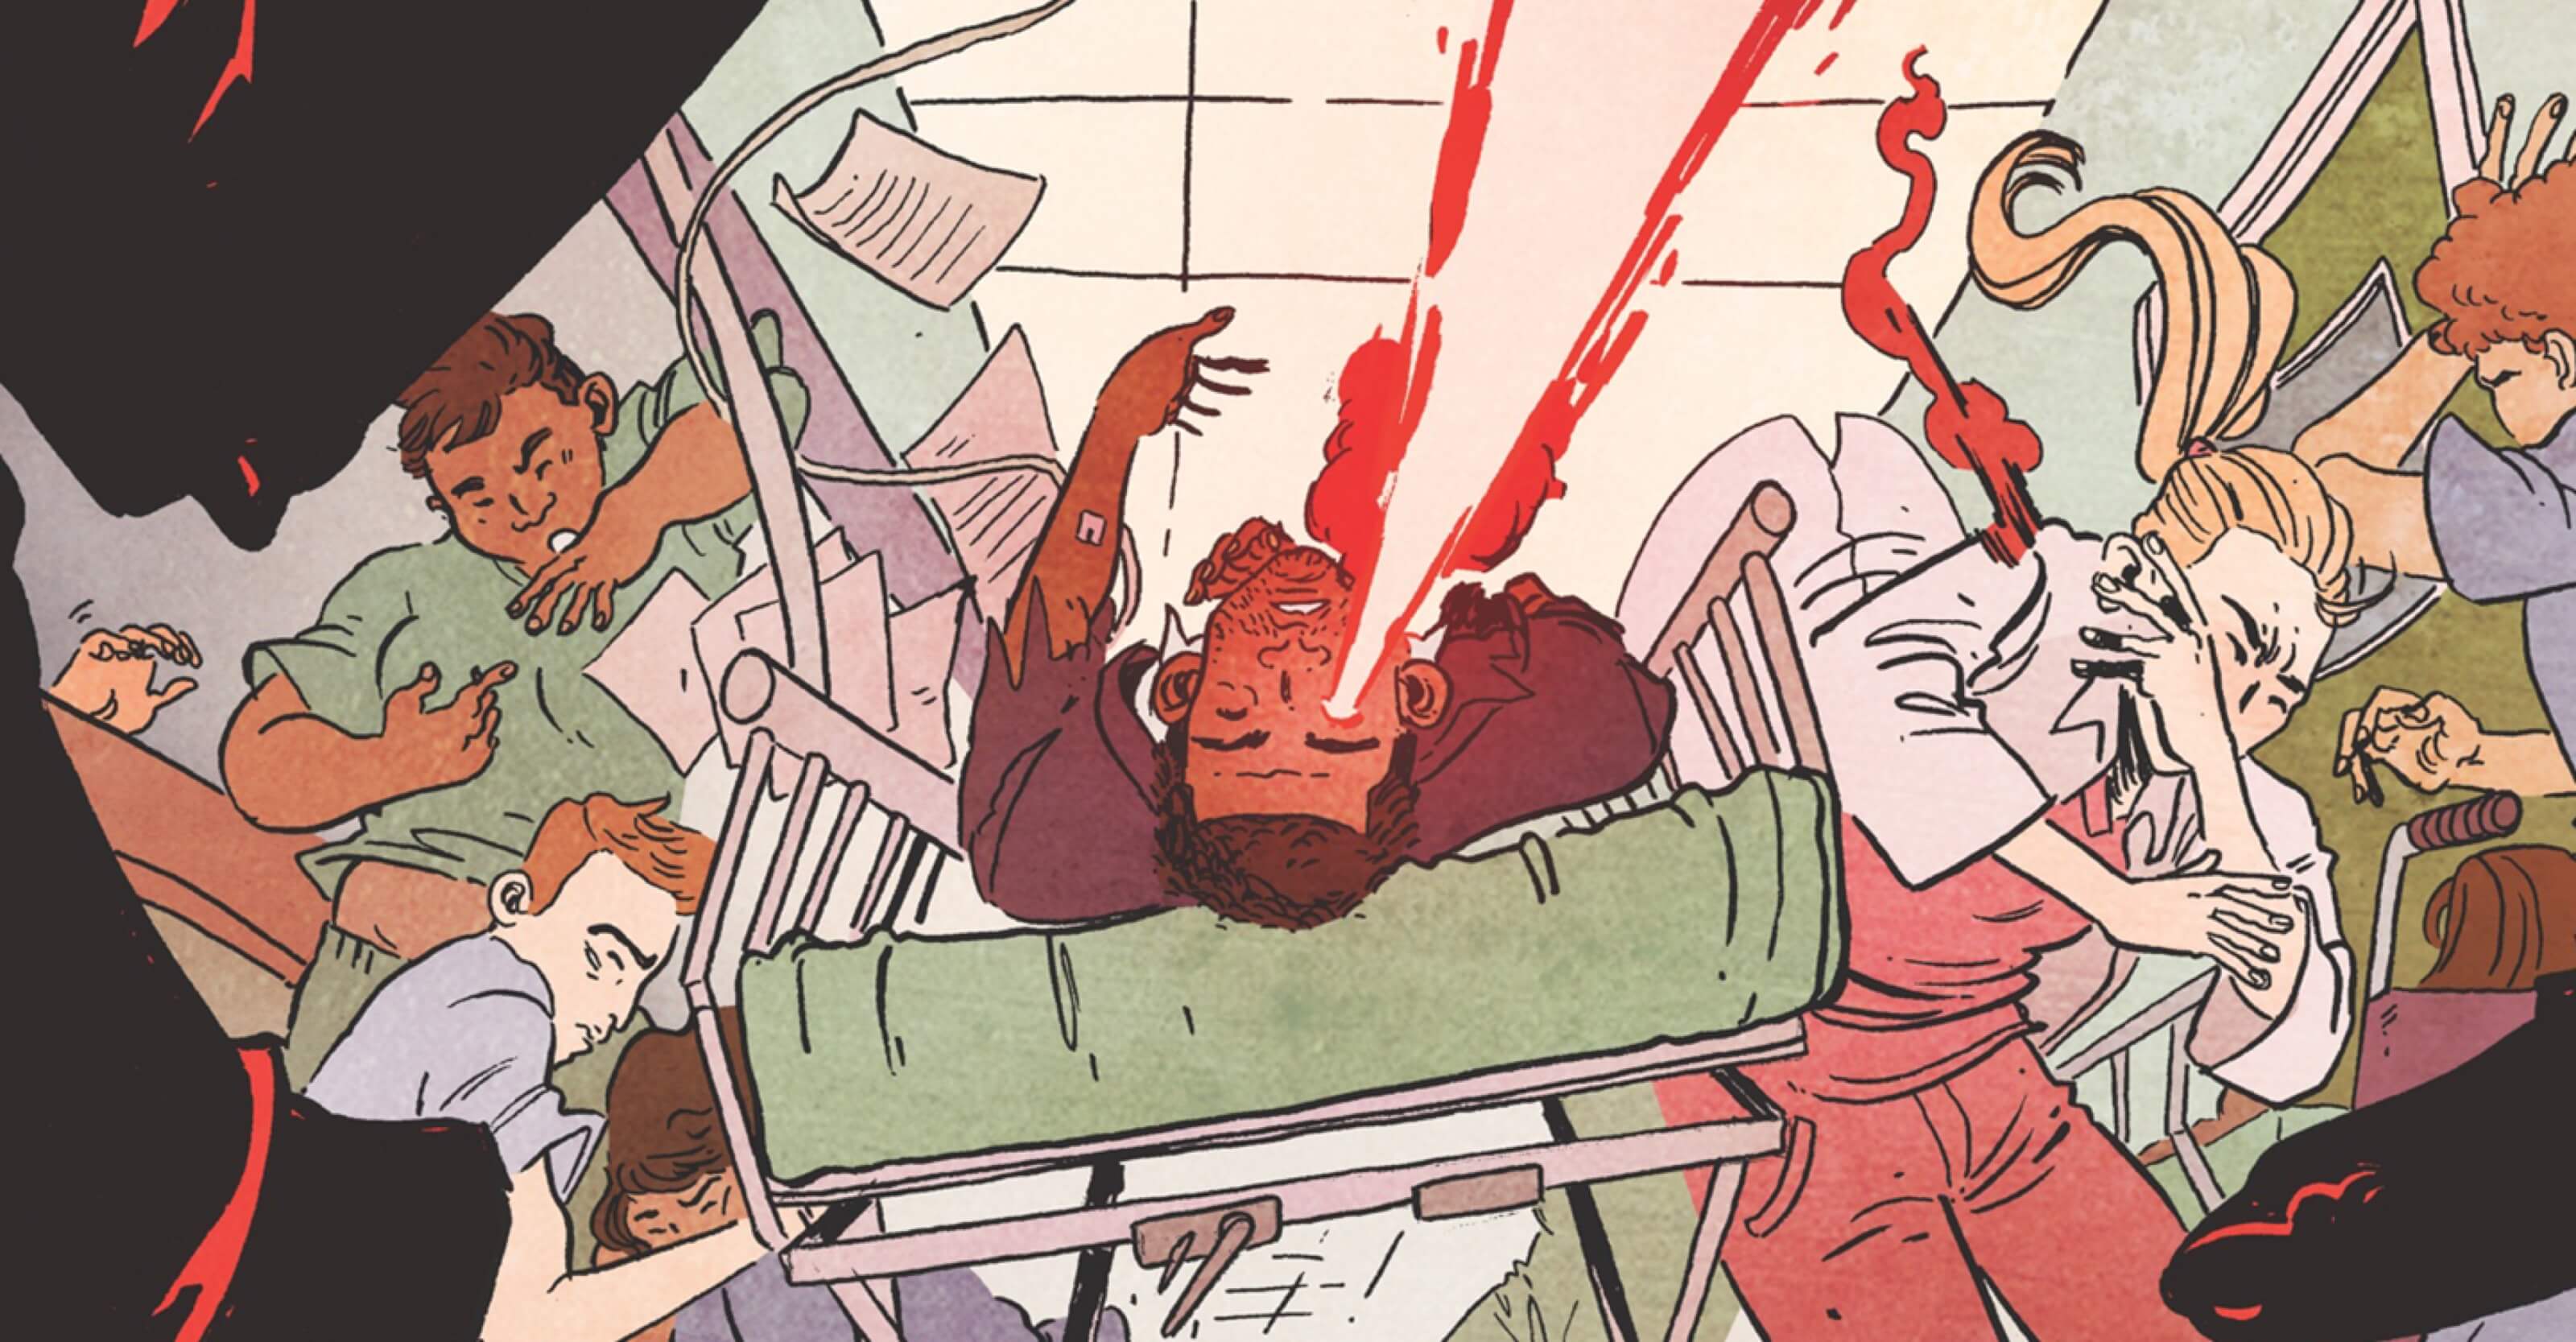 Superpowers and Emergency Room Drama Collide in Crashing Comic Book Miniseries from IDW